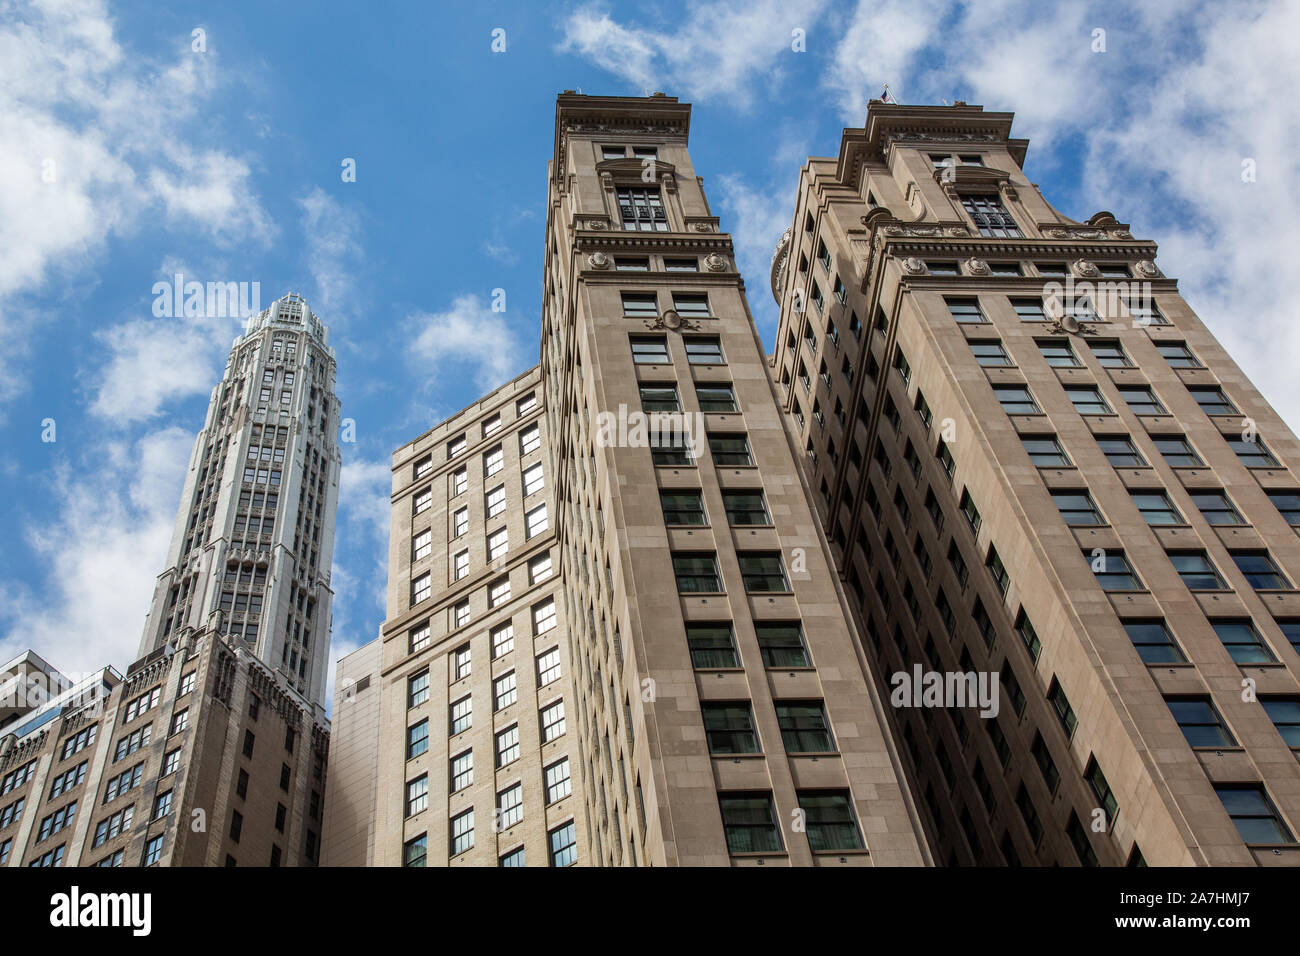 London Guarantee and Accident Building, and Mather Tower, The Loop, Chicago, USA Stock Photo